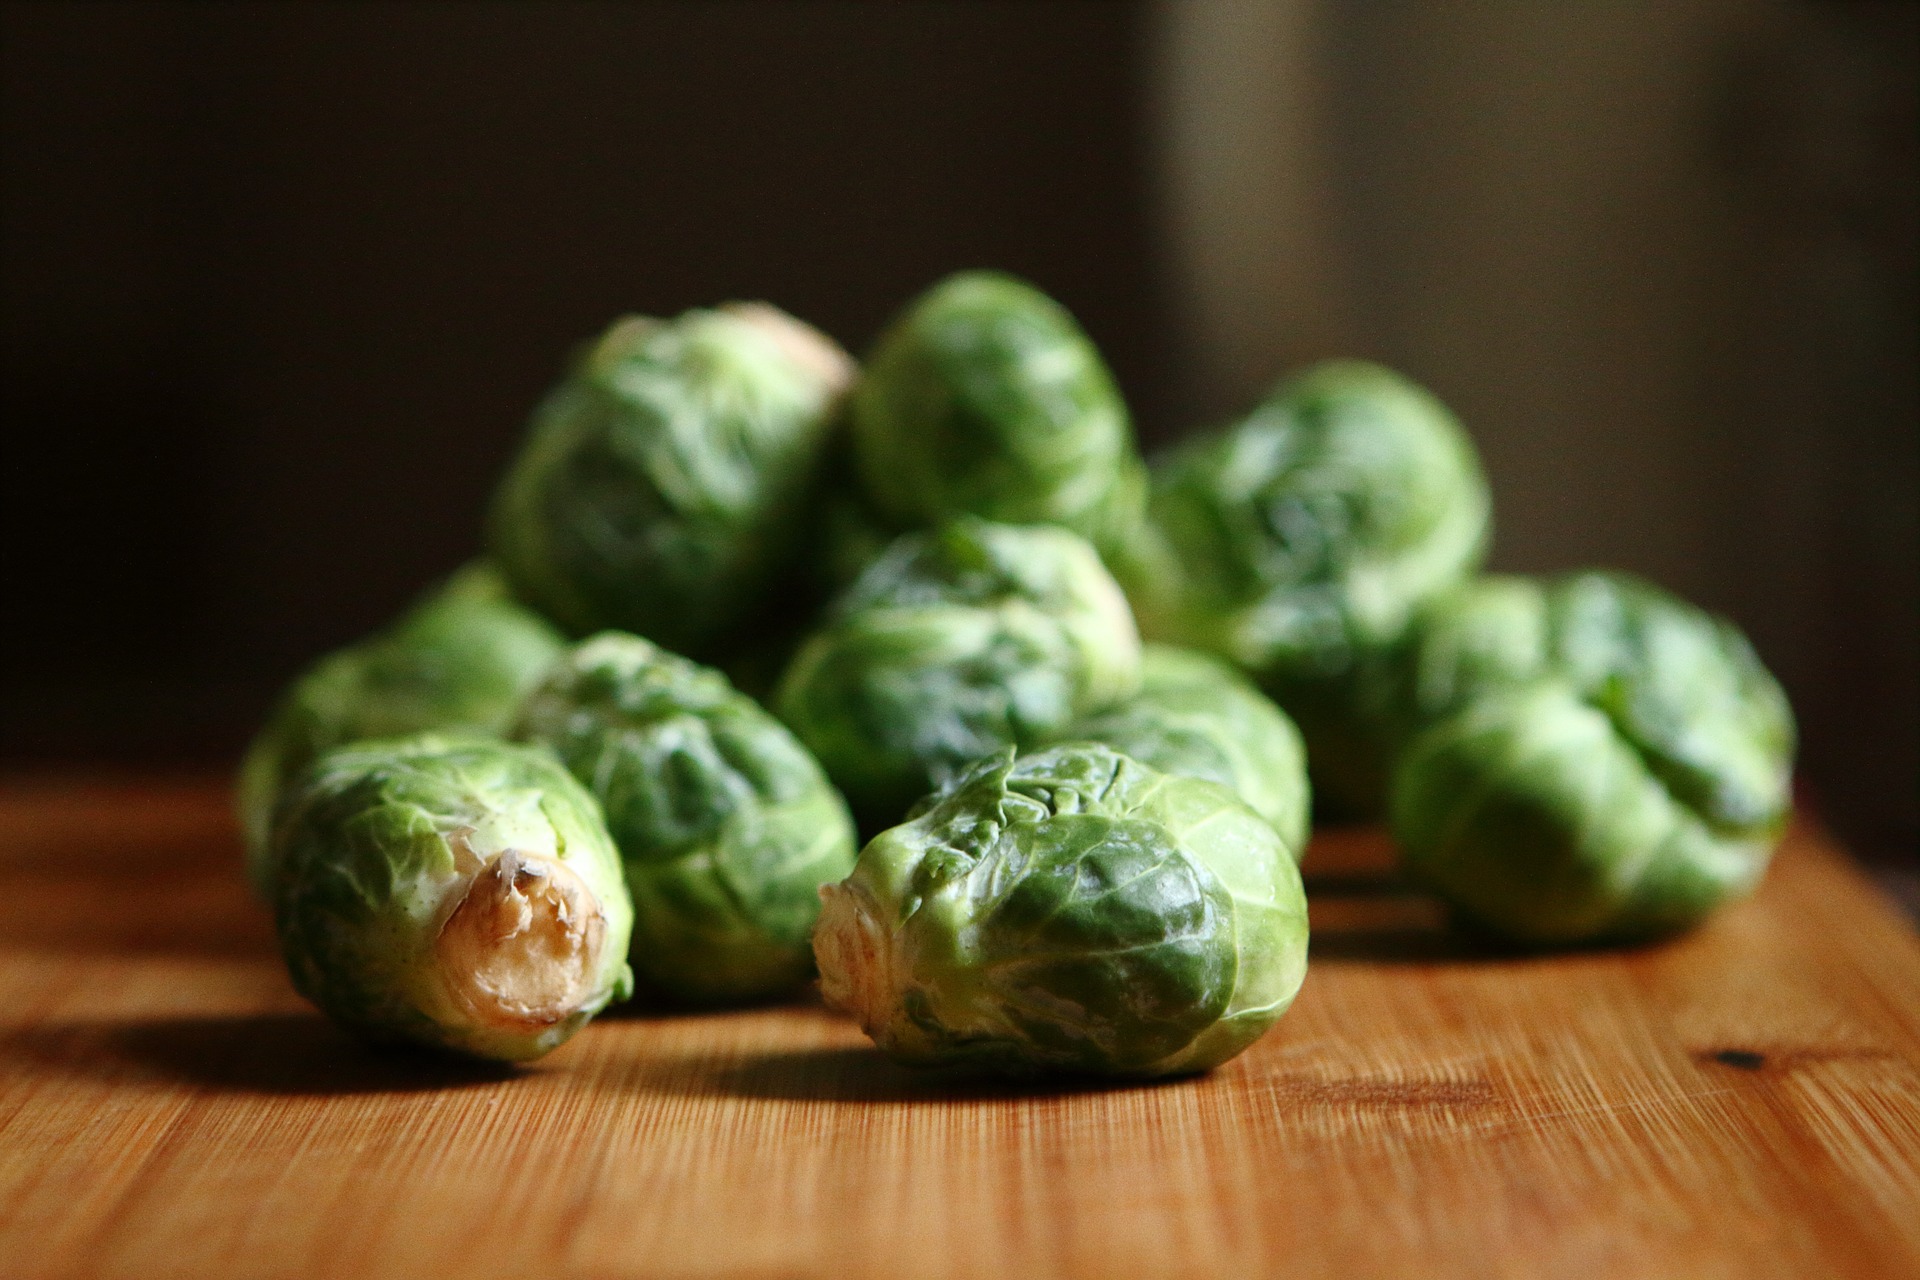 brussels-sprouts-865315_1920.jpg